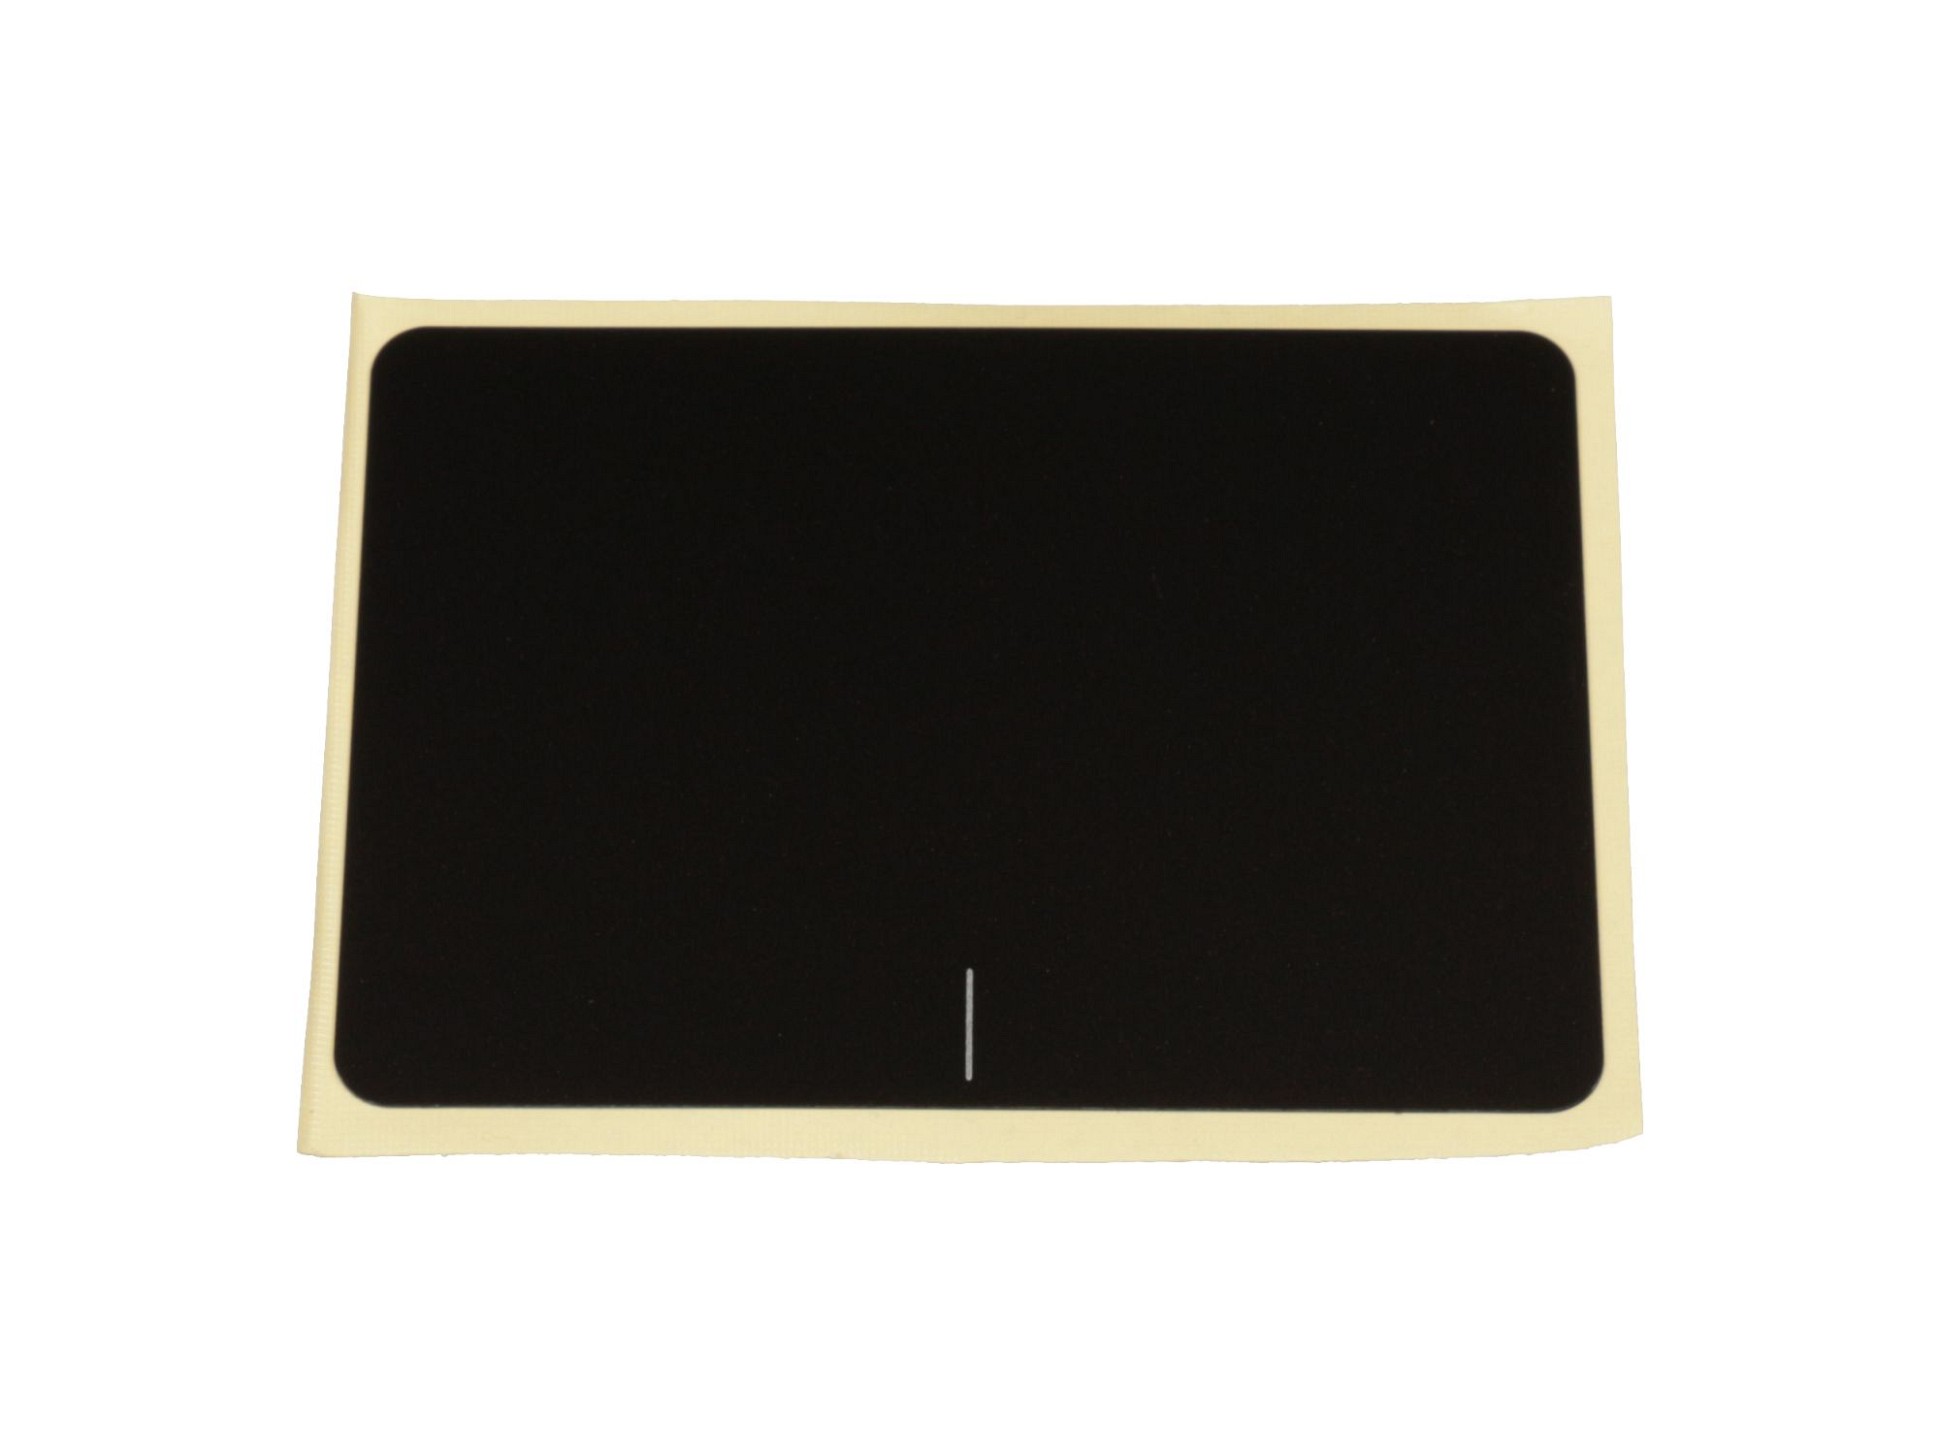 Touchpad-Cover für Asus F756UB